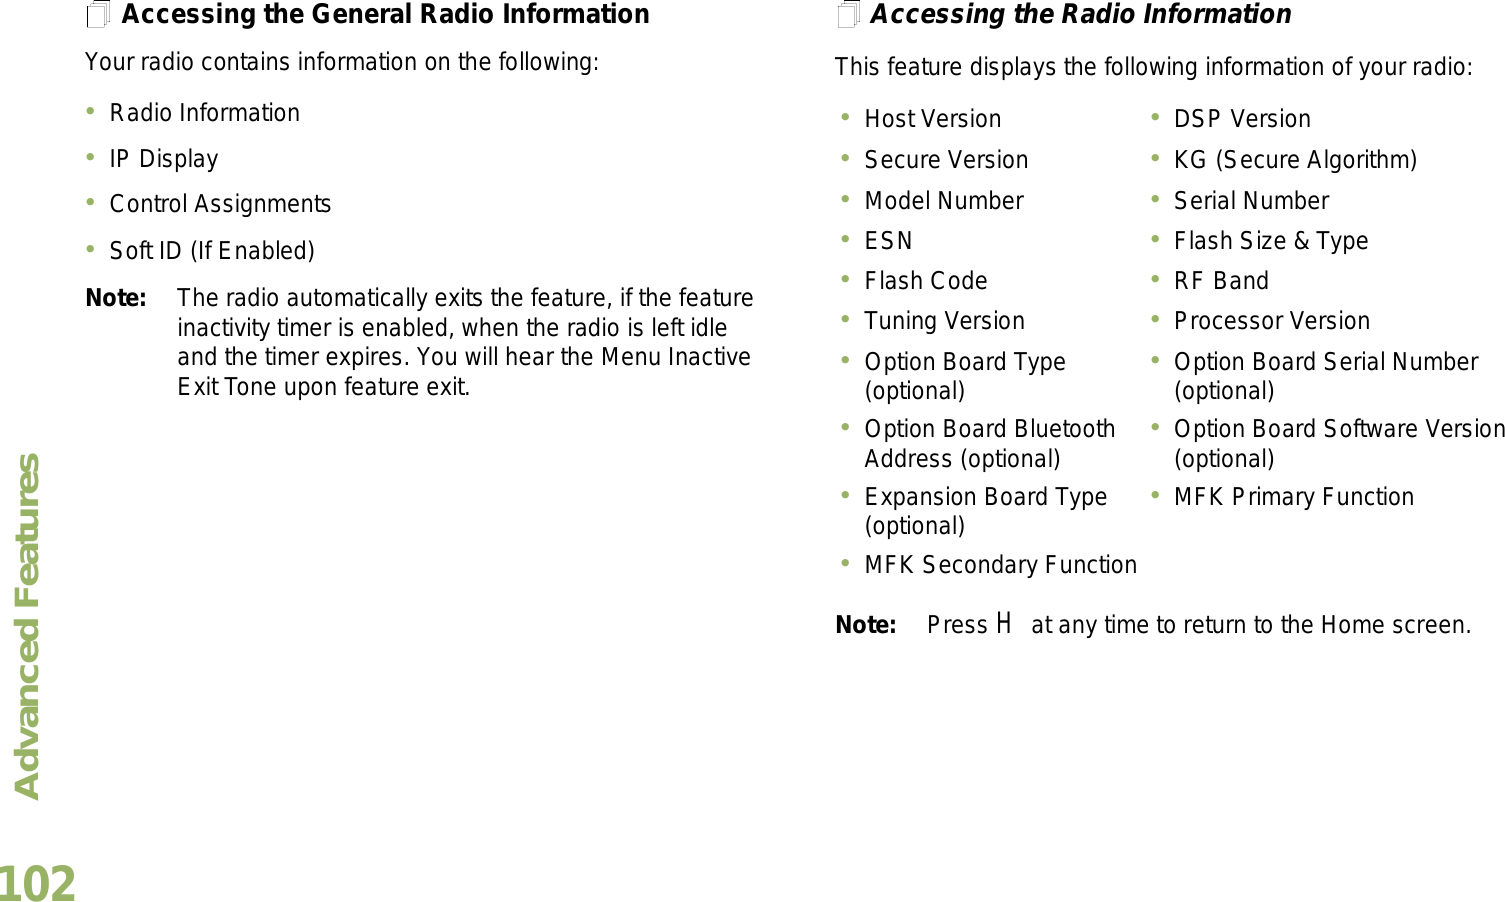 Advanced FeaturesEnglish102Accessing the General Radio InformationYour radio contains information on the following:Radio InformationIP DisplayControl AssignmentsSoft ID (If Enabled)Note: The radio automatically exits the feature, if the feature inactivity timer is enabled, when the radio is left idle and the timer expires. You will hear the Menu Inactive Exit Tone upon feature exit.Accessing the Radio InformationThis feature displays the following information of your radio: Note: Press H at any time to return to the Home screen.Host Version DSP VersionSecure Version KG (Secure Algorithm)Model Number Serial NumberESN Flash Size &amp; TypeFlash Code RF BandTuning Version Processor VersionOption Board Type (optional) Option Board Serial Number (optional)Option Board Bluetooth Address (optional) Option Board Software Version (optional)Expansion Board Type (optional) MFK Primary FunctionMFK Secondary Function